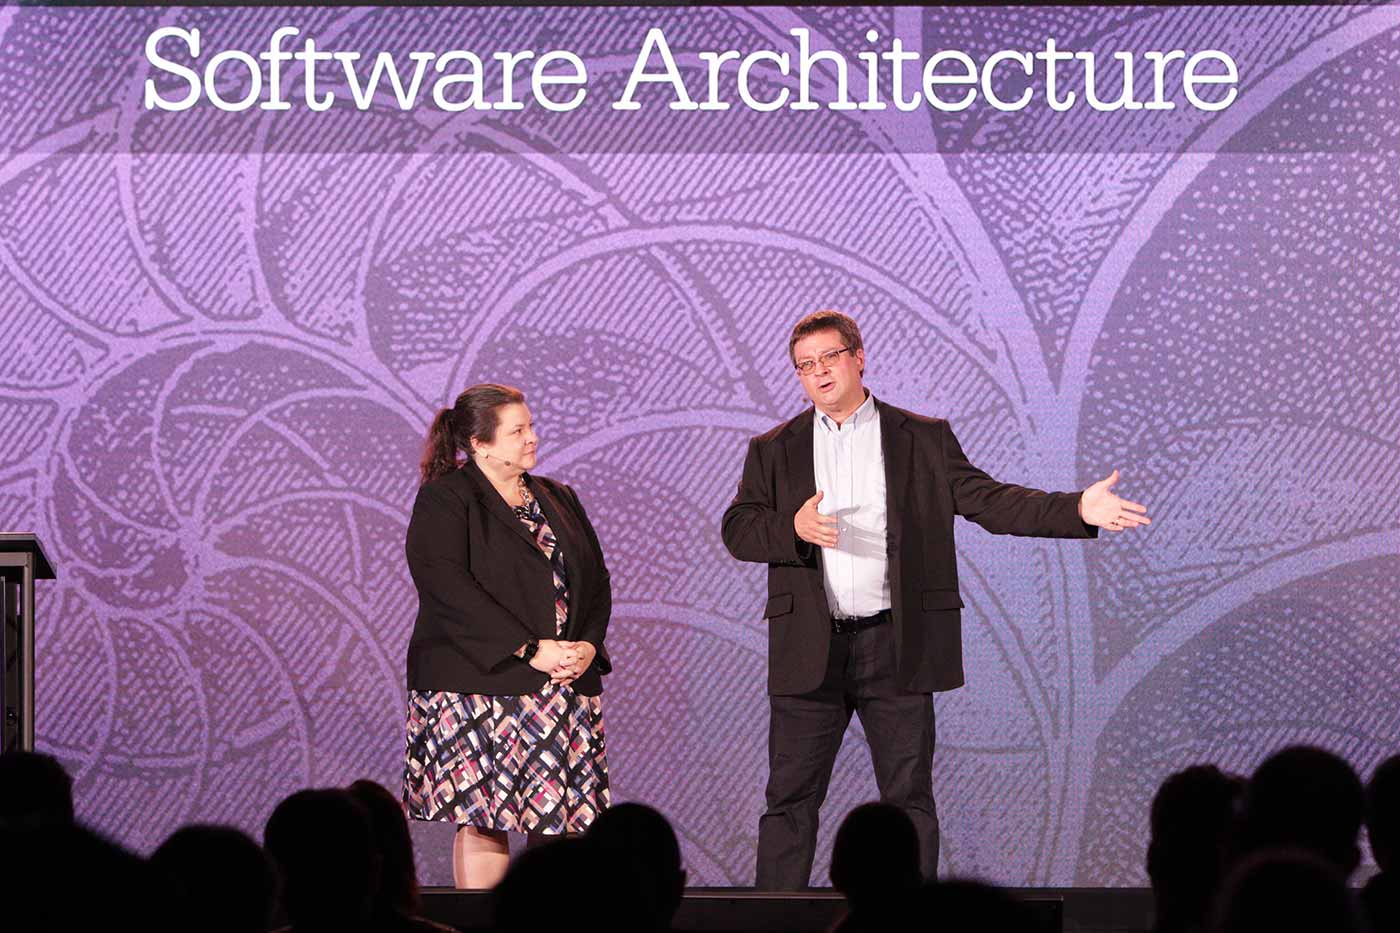 Rachel Roumeliotis (left) and Neal Ford (right) at the O'Reilly Software Architecture Conference in San Francisco.